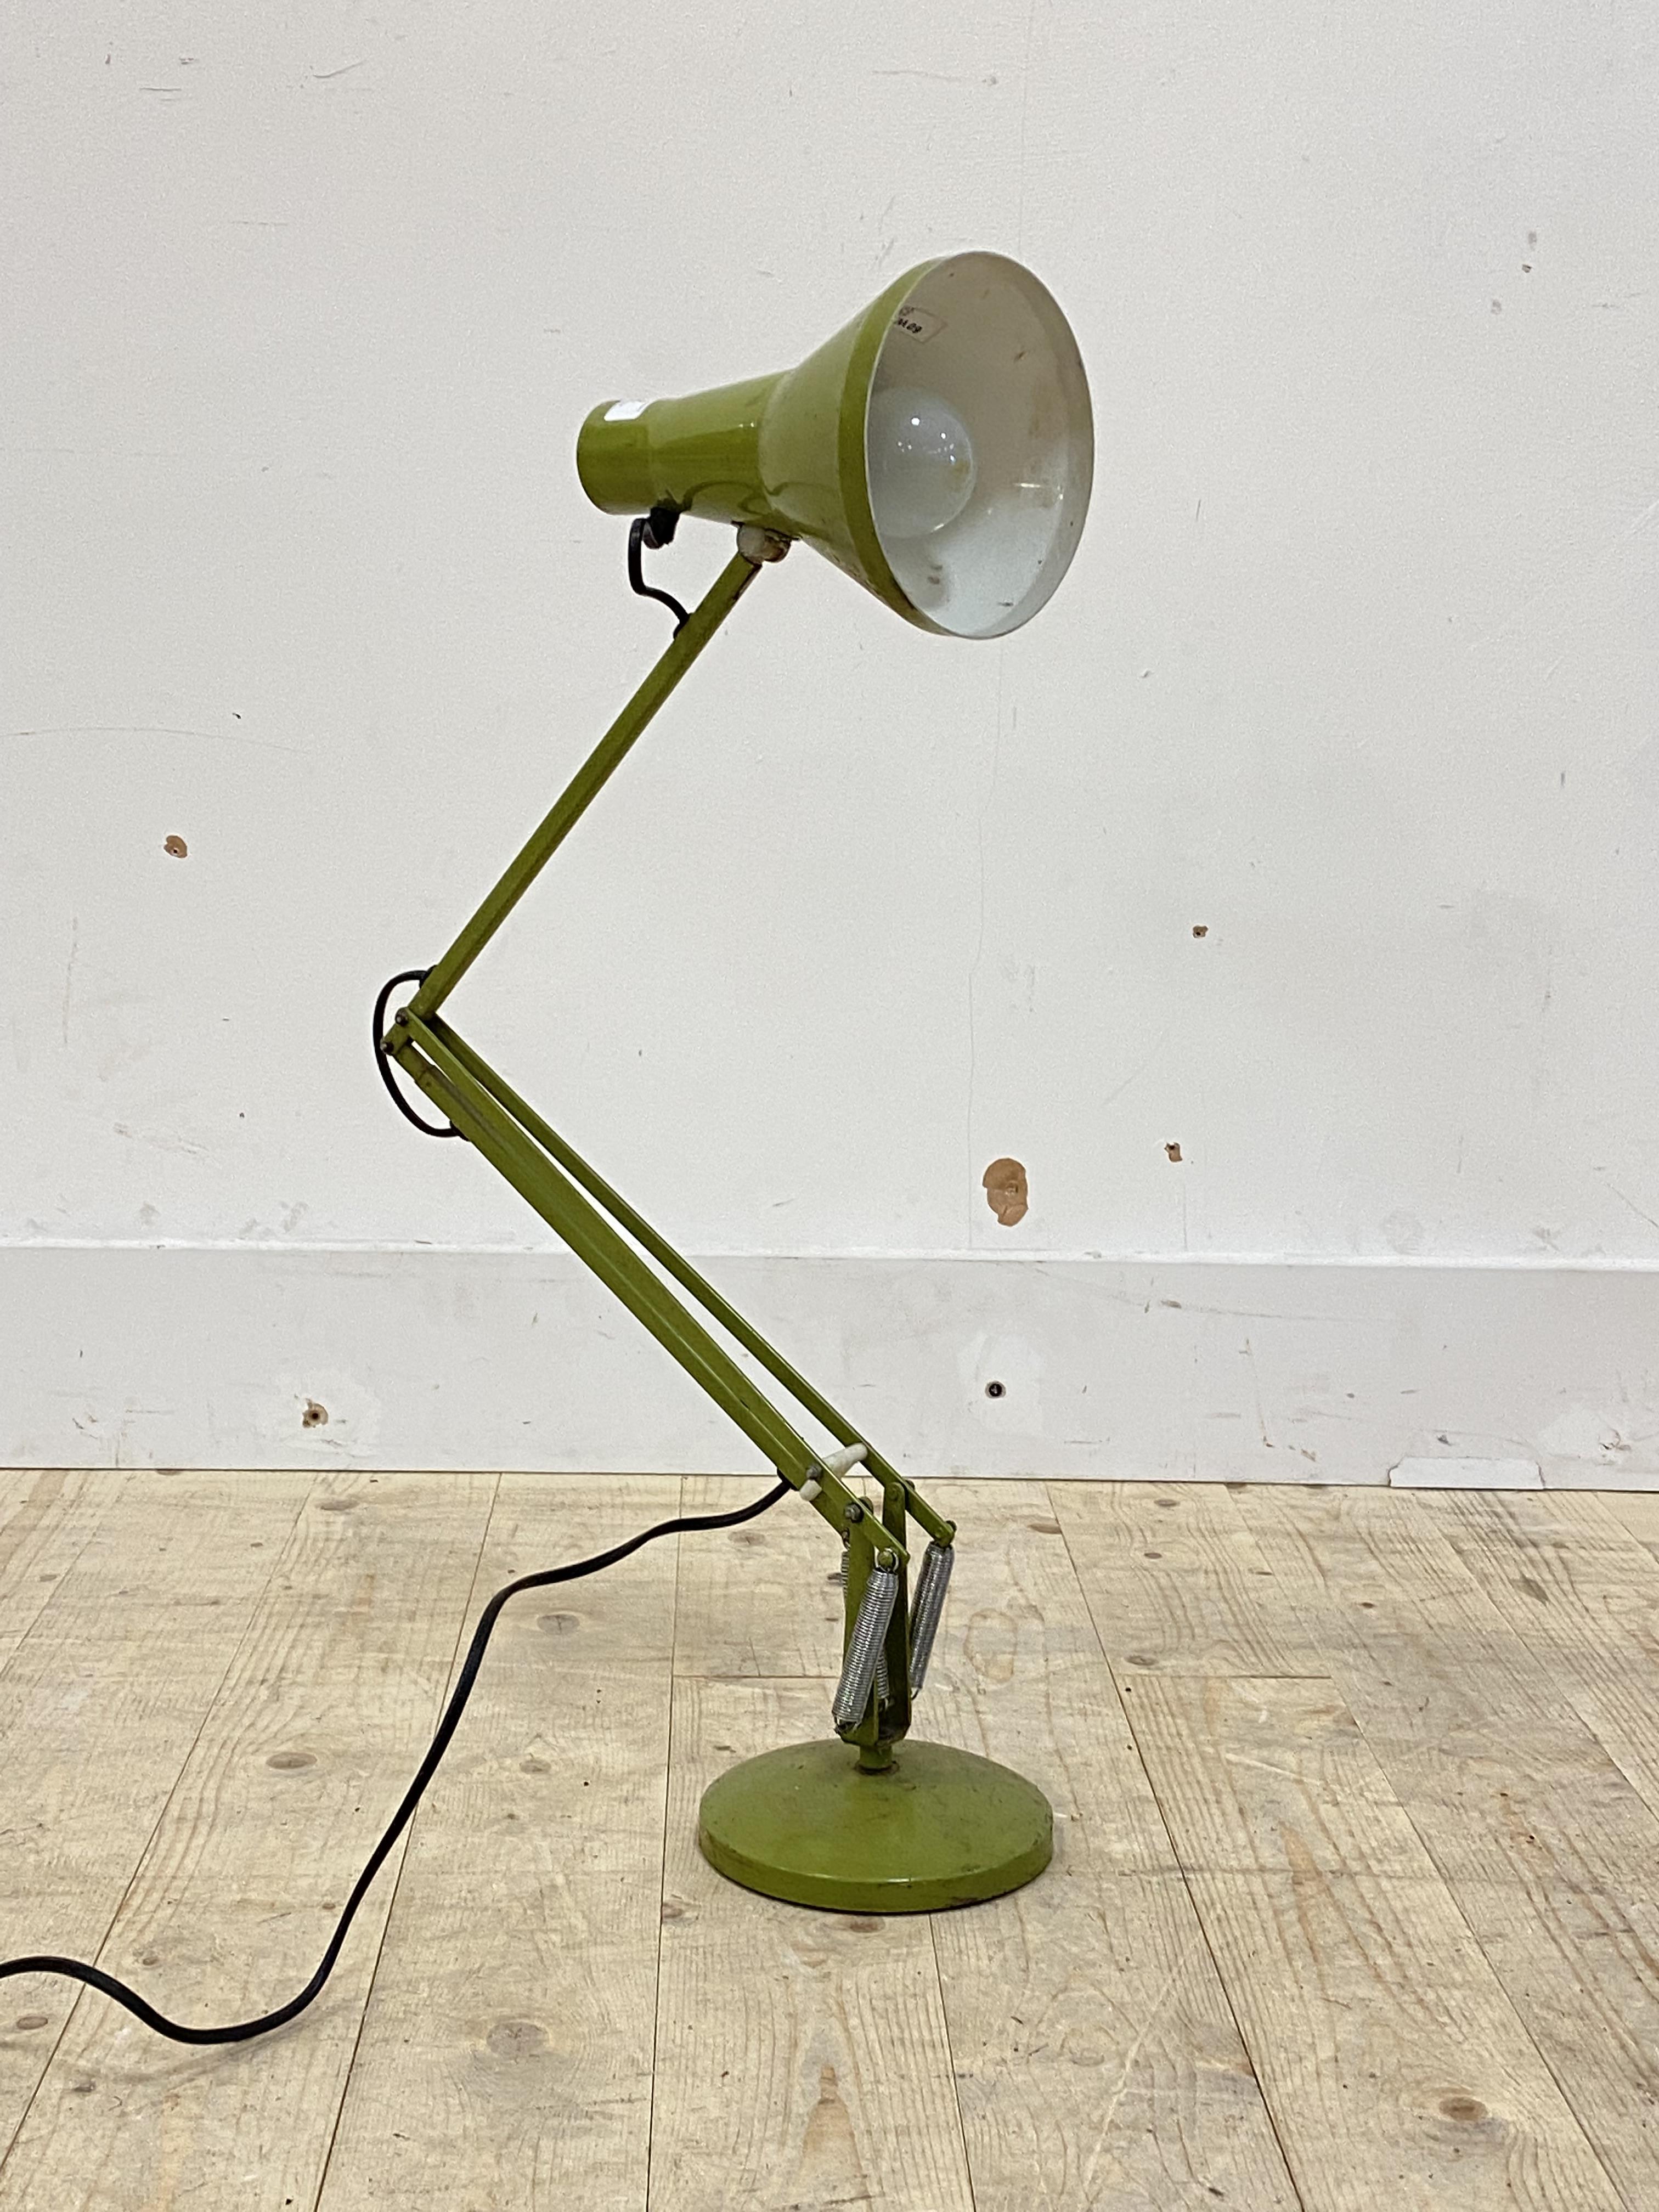 A vintage anglepoise lamp, in green